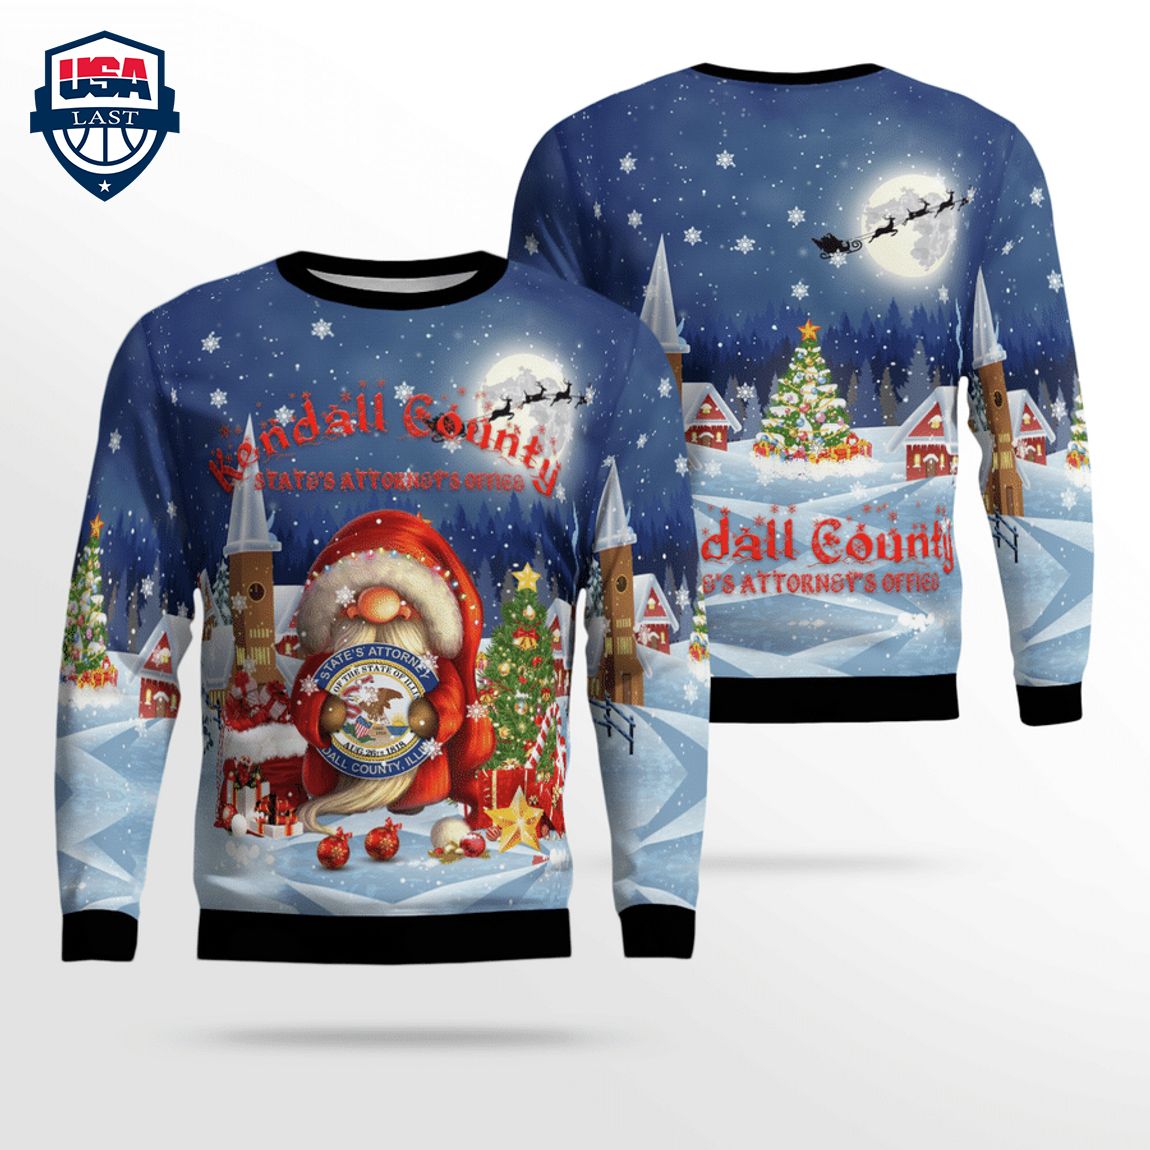 Kendall County State's Attorney's Office 3D Christmas Sweater - It is too funny